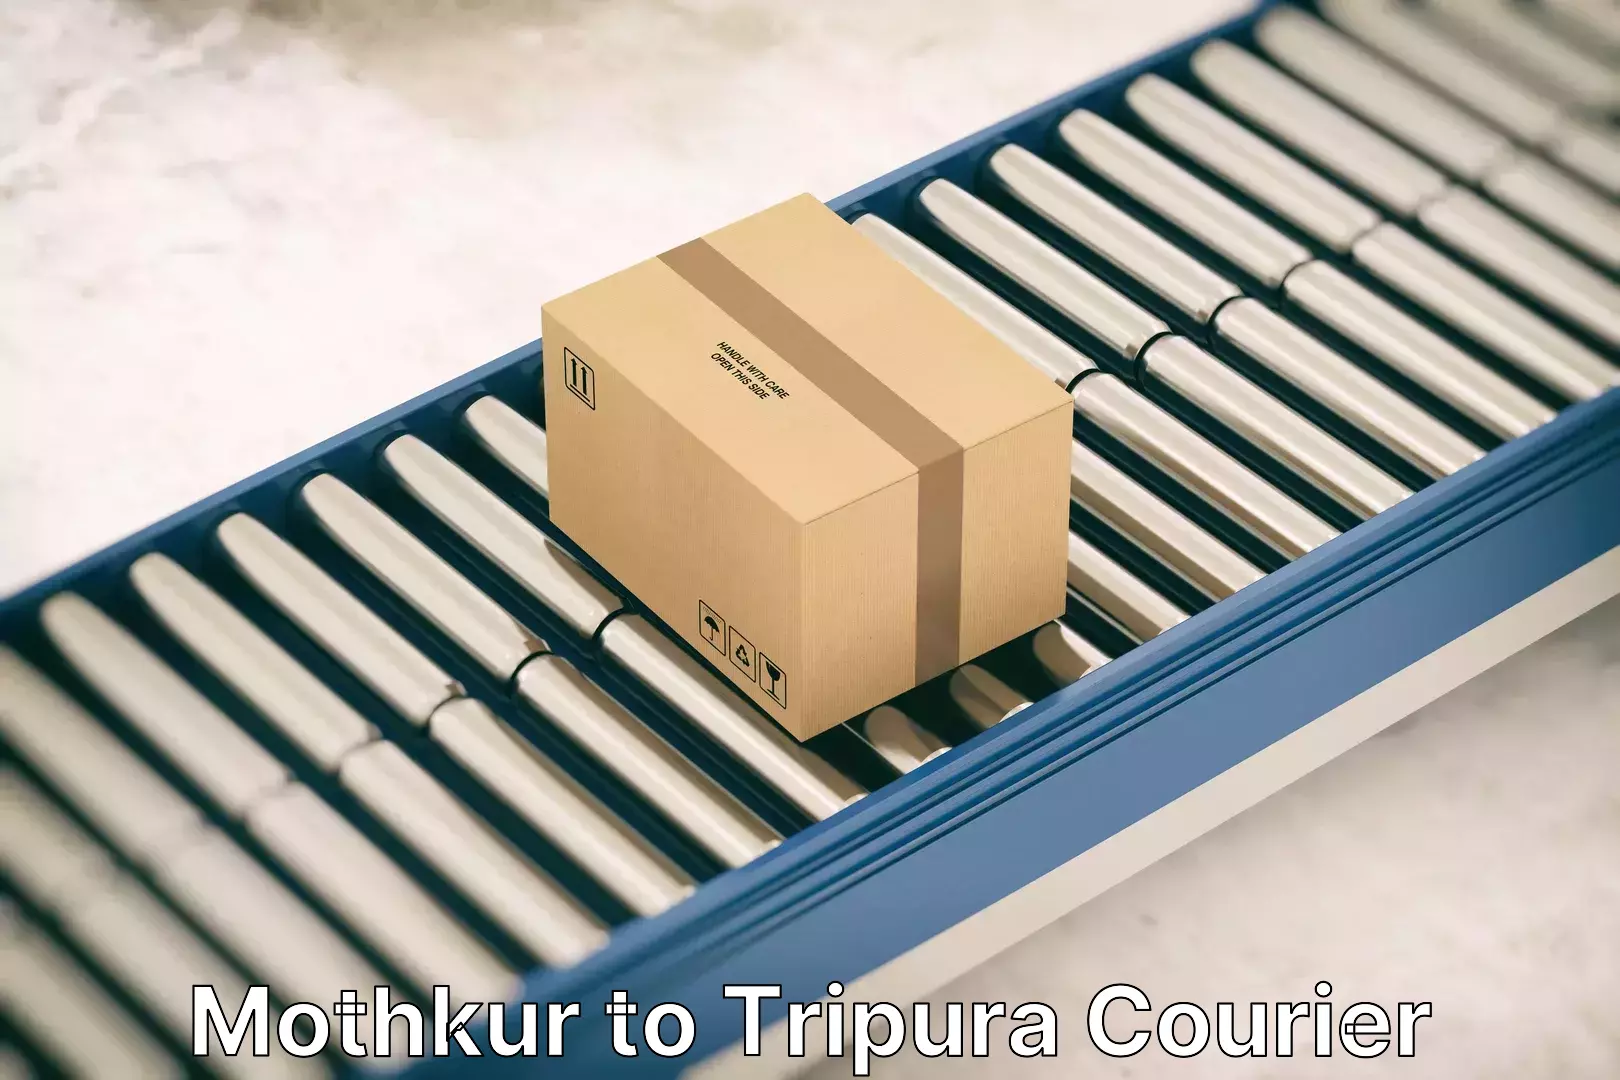 Professional movers and packers Mothkur to Tripura